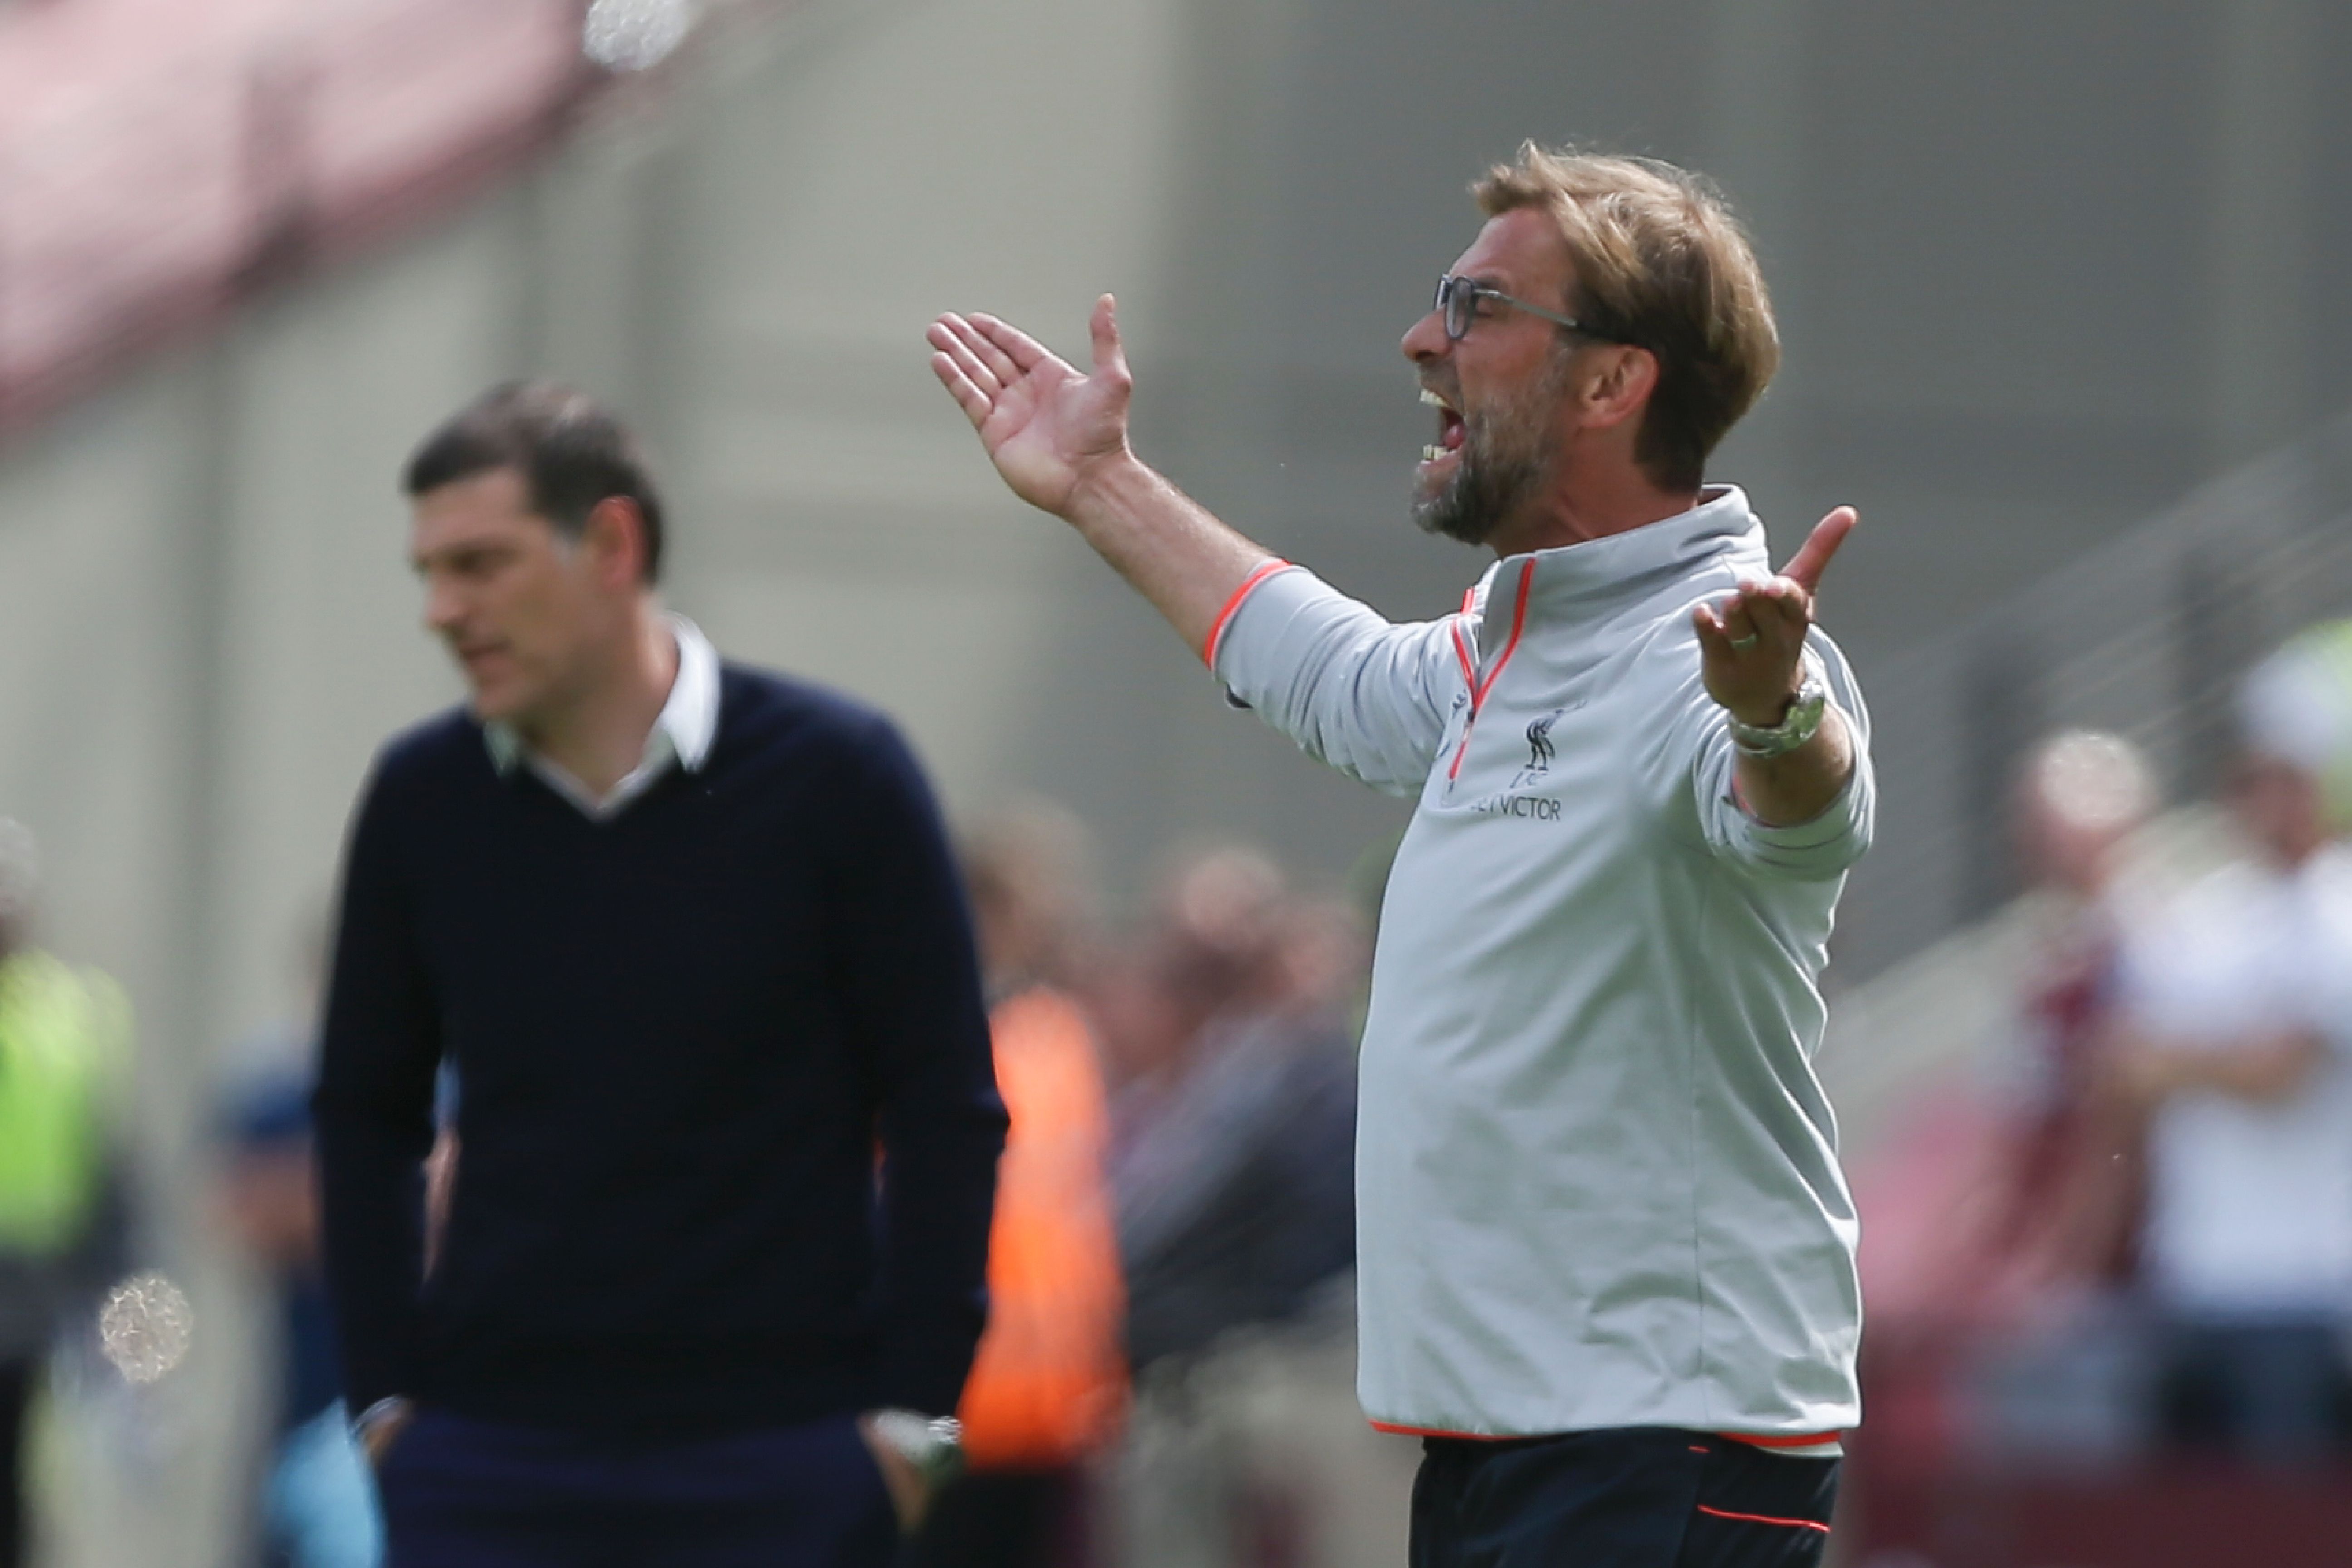 Liverpool's German manager Jurgen Klopp (R) gestures as West Ham United's Croatian manager Slaven Bilic looks on during the English Premier League football match between West Ham United and Liverpool at The London Stadium, in east London on May 14, 2017. / AFP PHOTO / Daniel LEAL-OLIVAS / RESTRICTED TO EDITORIAL USE. No use with unauthorized audio, video, data, fixture lists, club/league logos or 'live' services. Online in-match use limited to 75 images, no video emulation. No use in betting, games or single club/league/player publications.  /         (Photo credit should read DANIEL LEAL-OLIVAS/AFP/Getty Images)